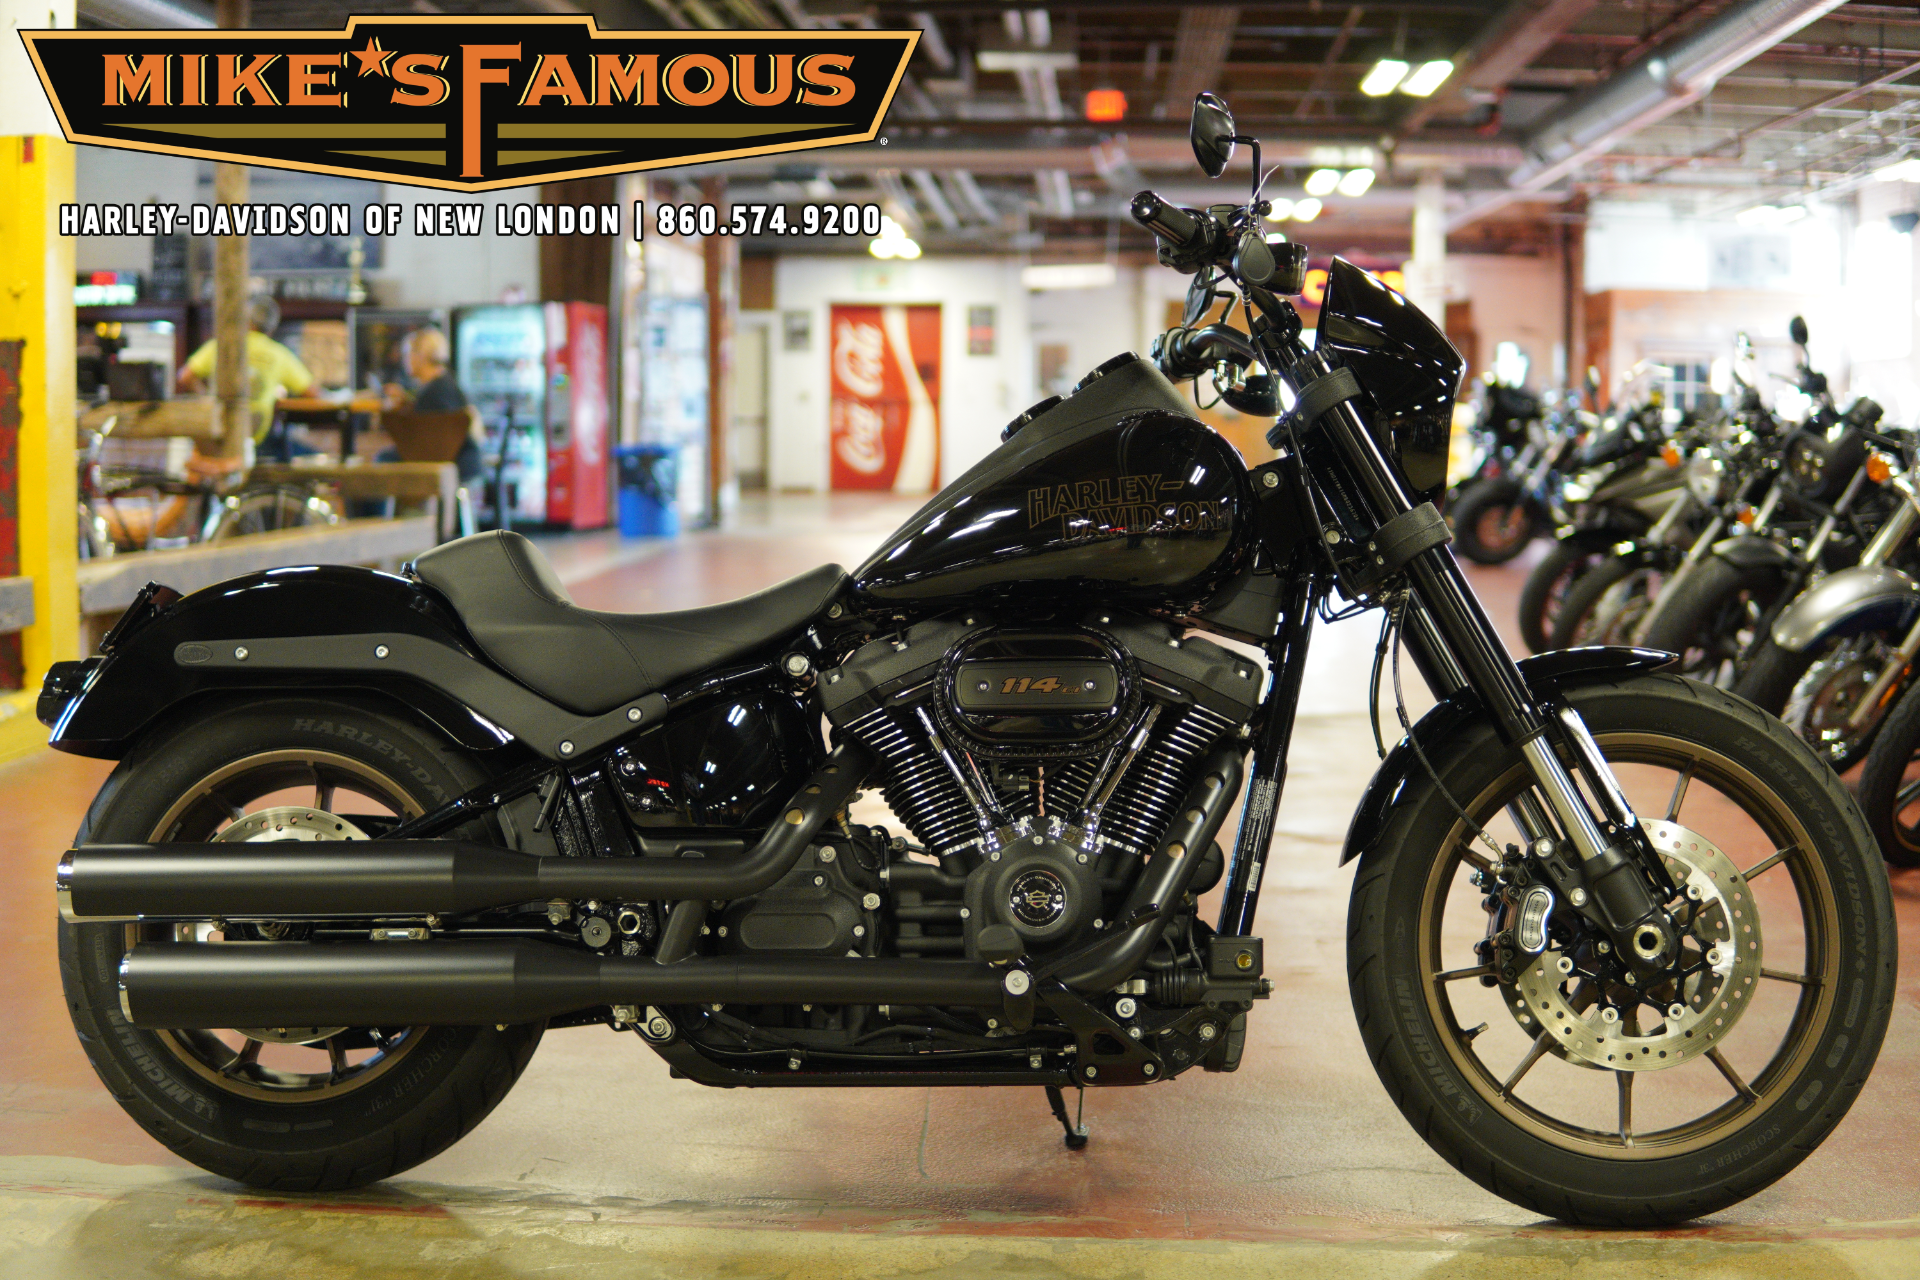 Used 2021 Harley Davidson Low Rider S Vivid Black Motorcycles In New London Ct T23670